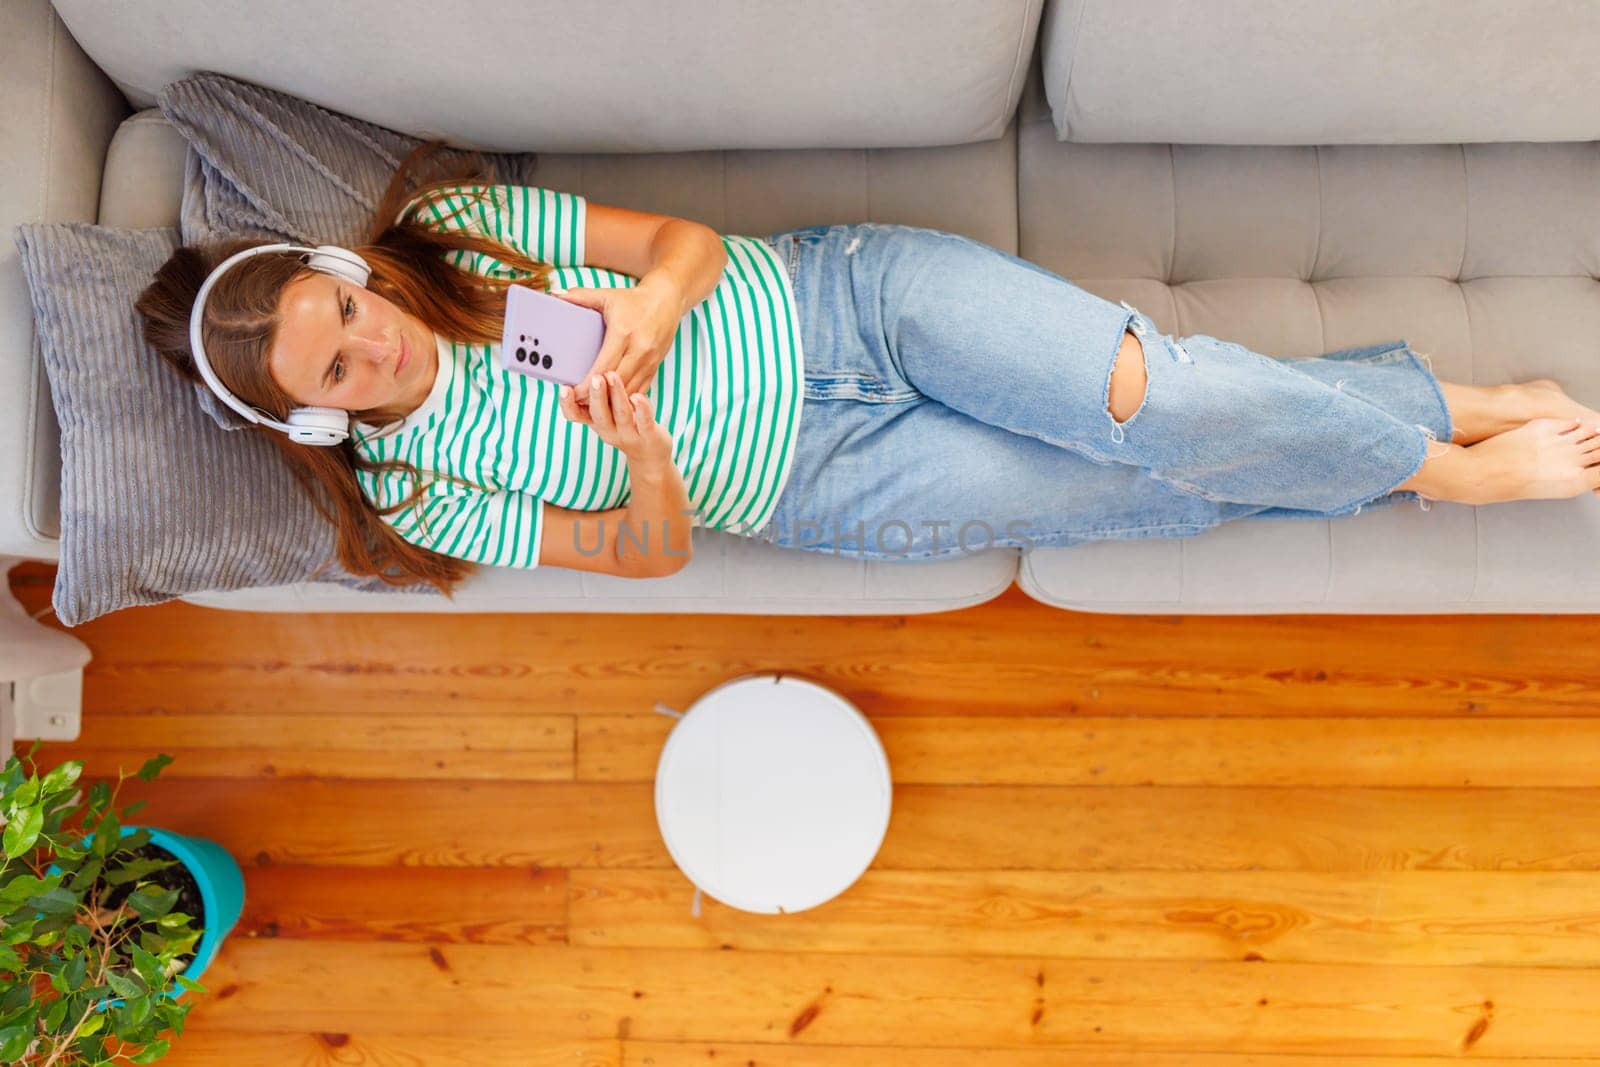 A young woman enjoys a peaceful moment on a sofa, listening to music on her headphones while holding a smartphone, with a robotic vacuum cleaner in the background.